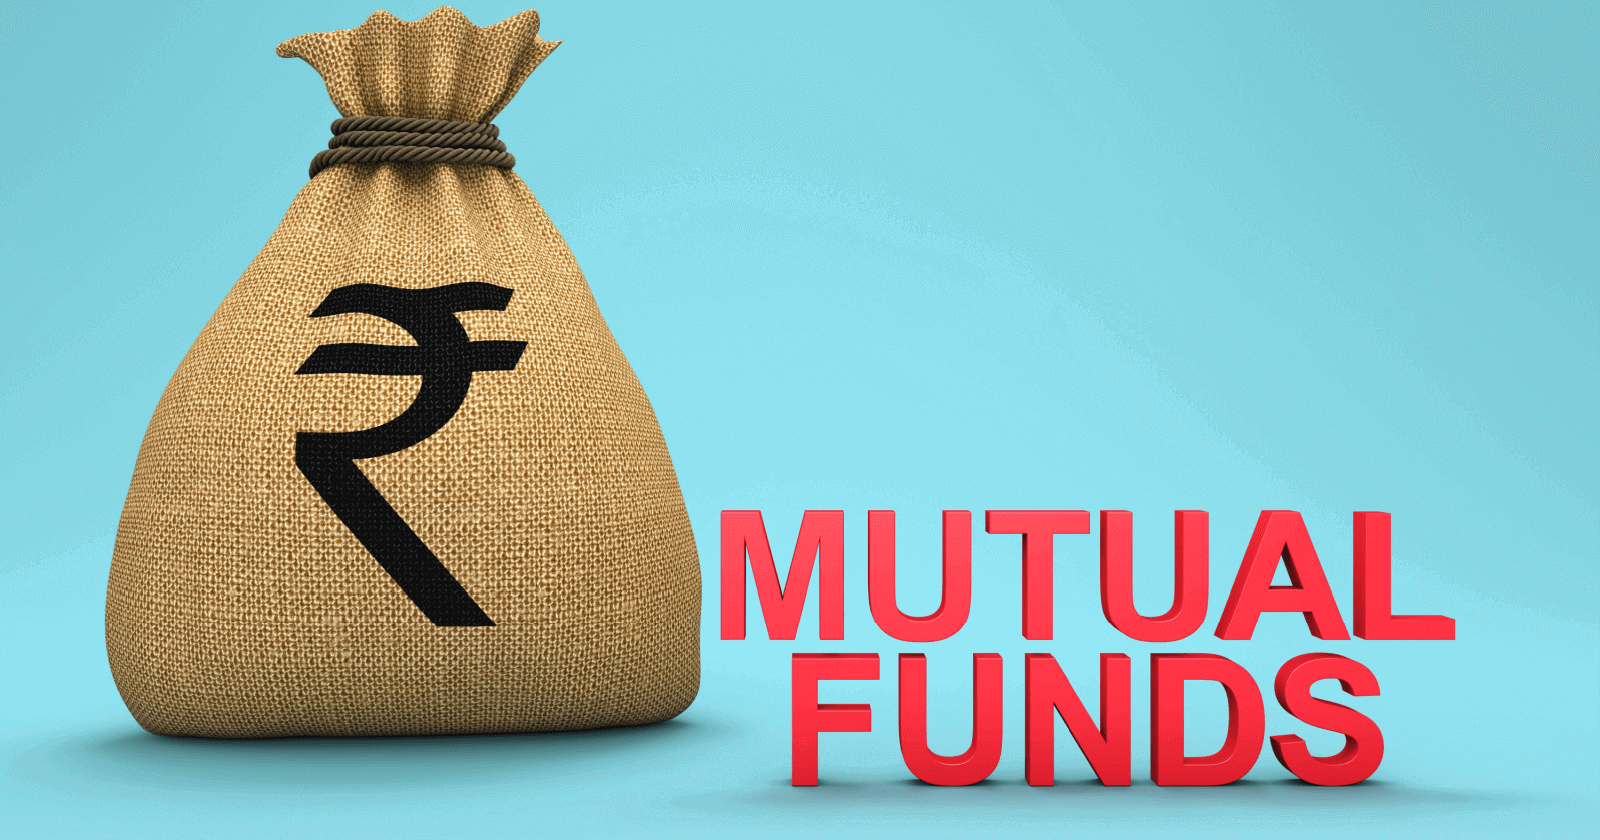 Mutual Funds: Meaning, Benefits, How They Work, and How to Invest